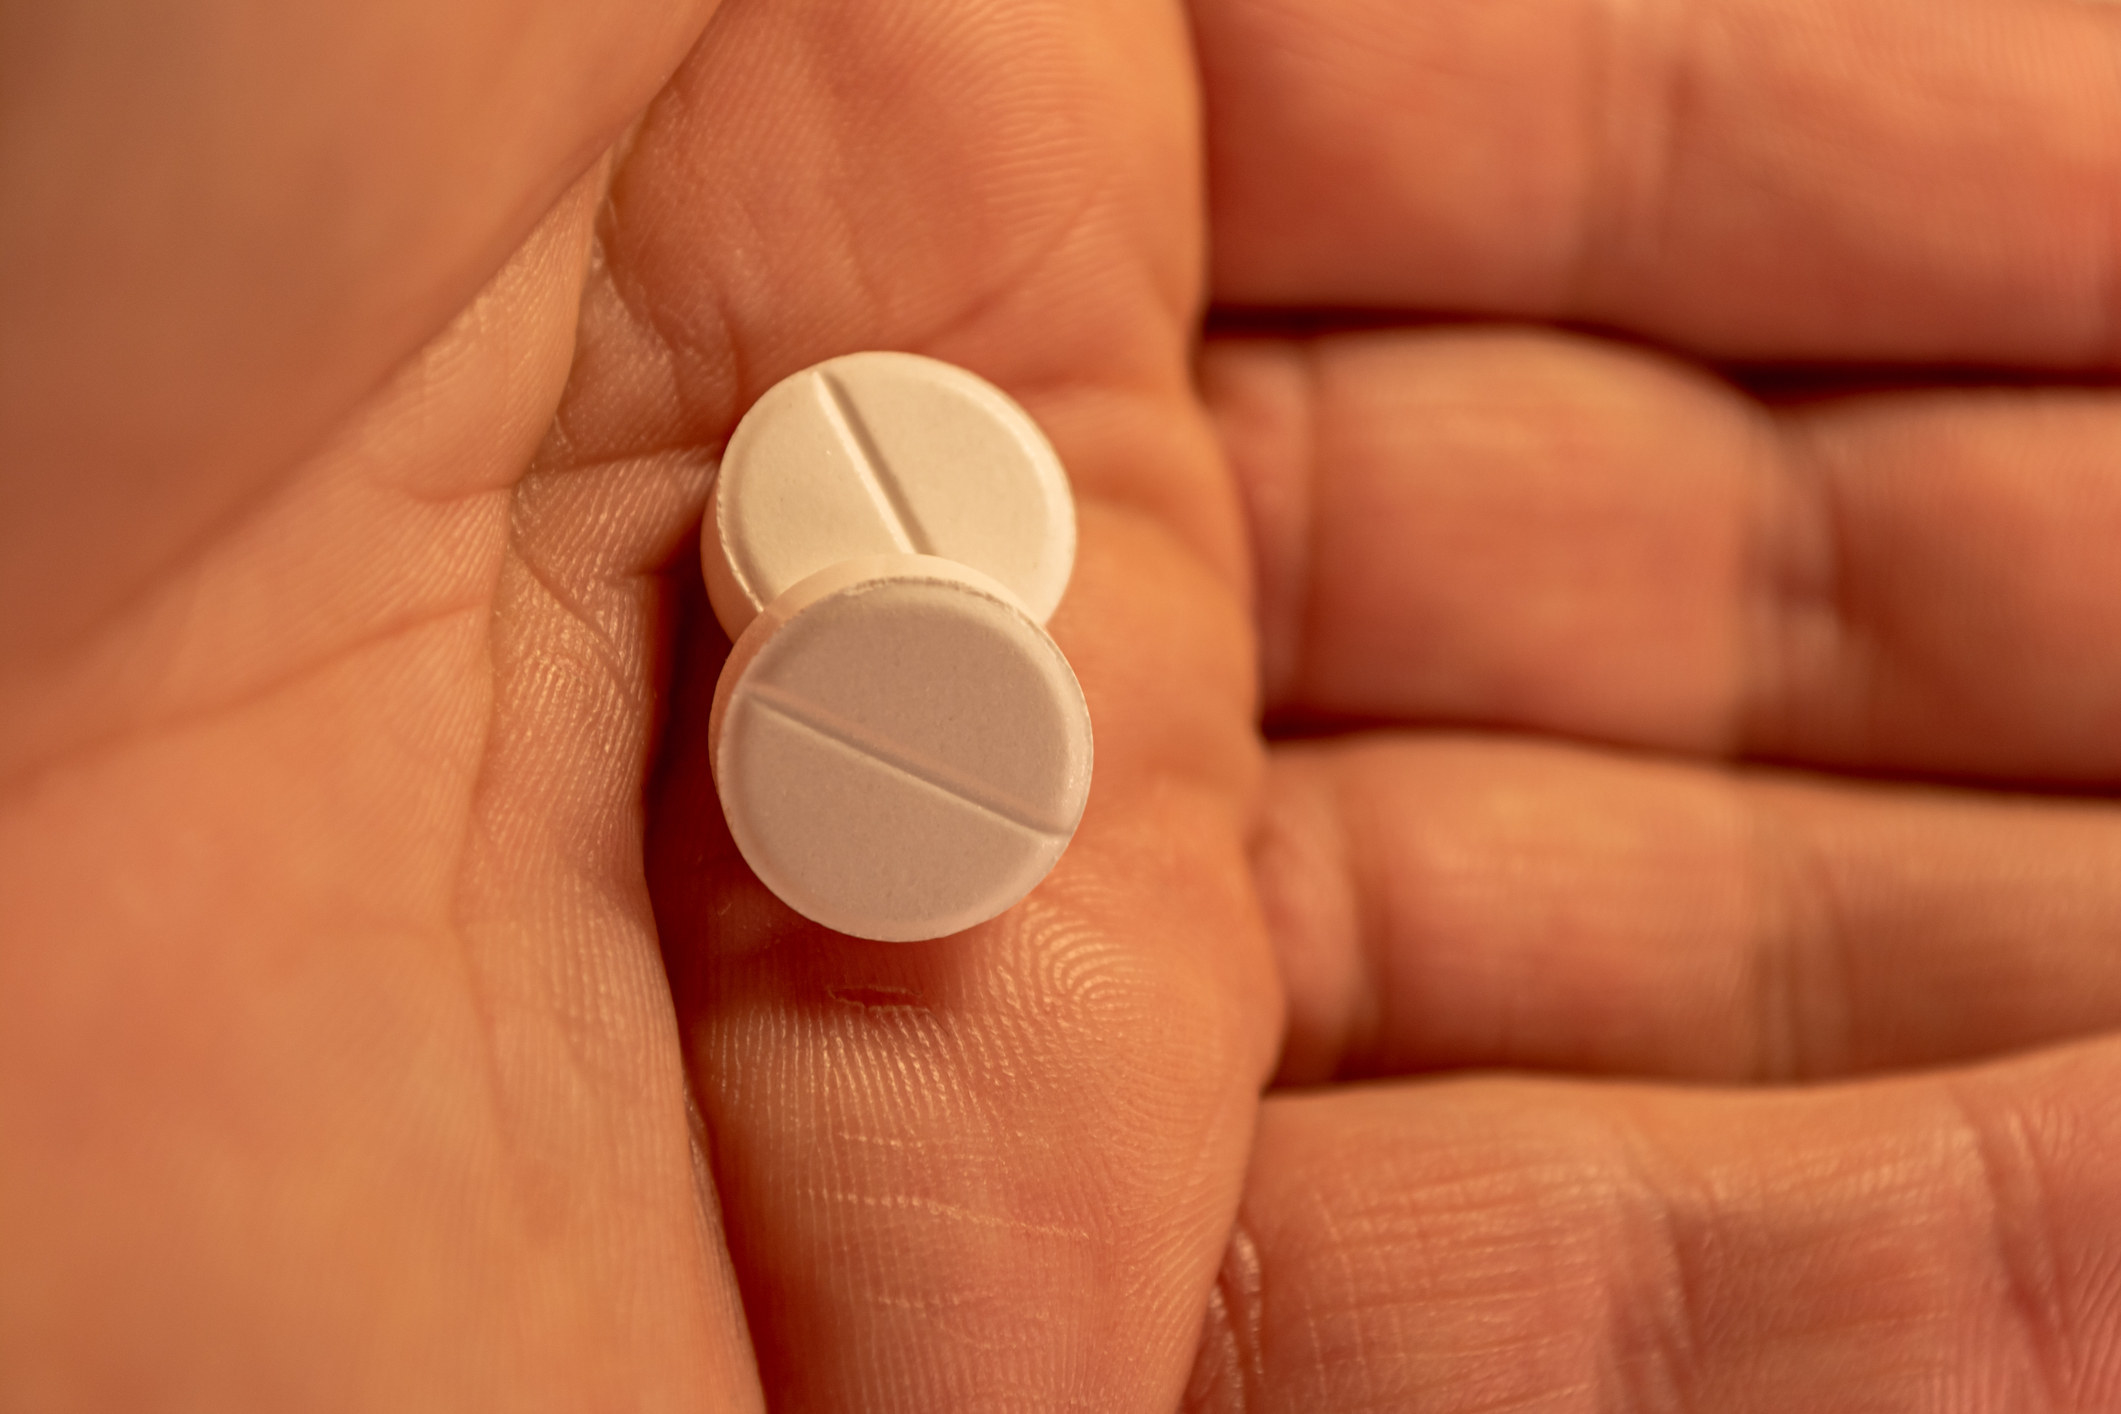 Stock image of a hand holding two pills